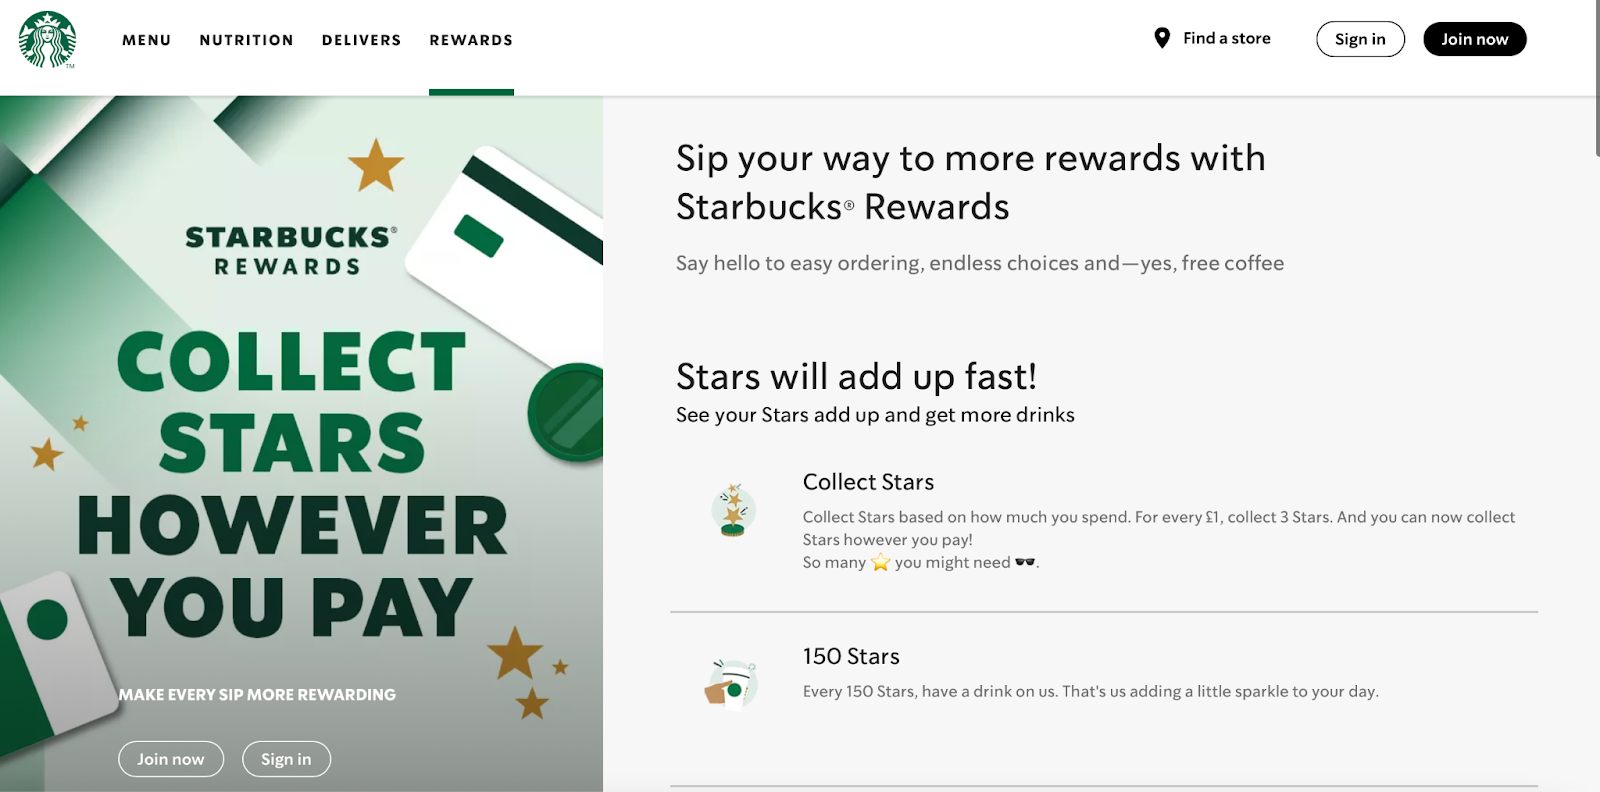 Starbucks Rewards is a perfect example of a loyalty program that works: free drinks for points.